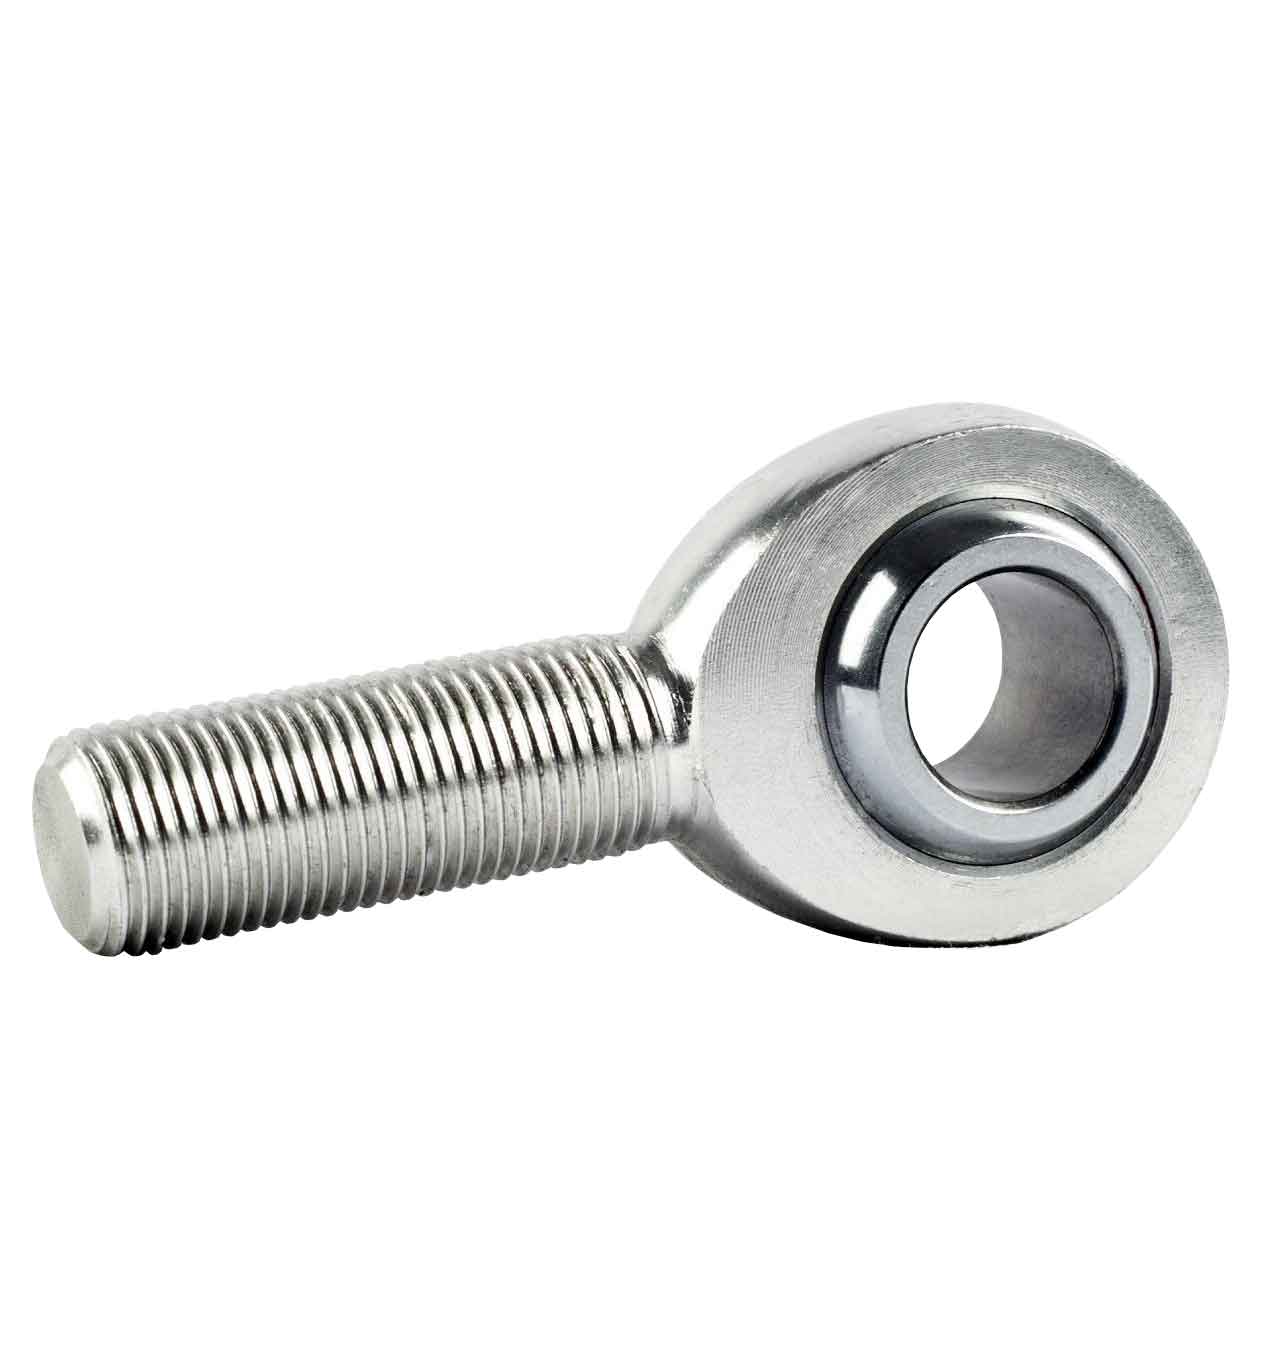 SS-POS12L GENERIC 12mm M12X1.75 STAINLESS STEEL MALE ROD END BEARING WITH LEFT HAND THREAD Thumbnail